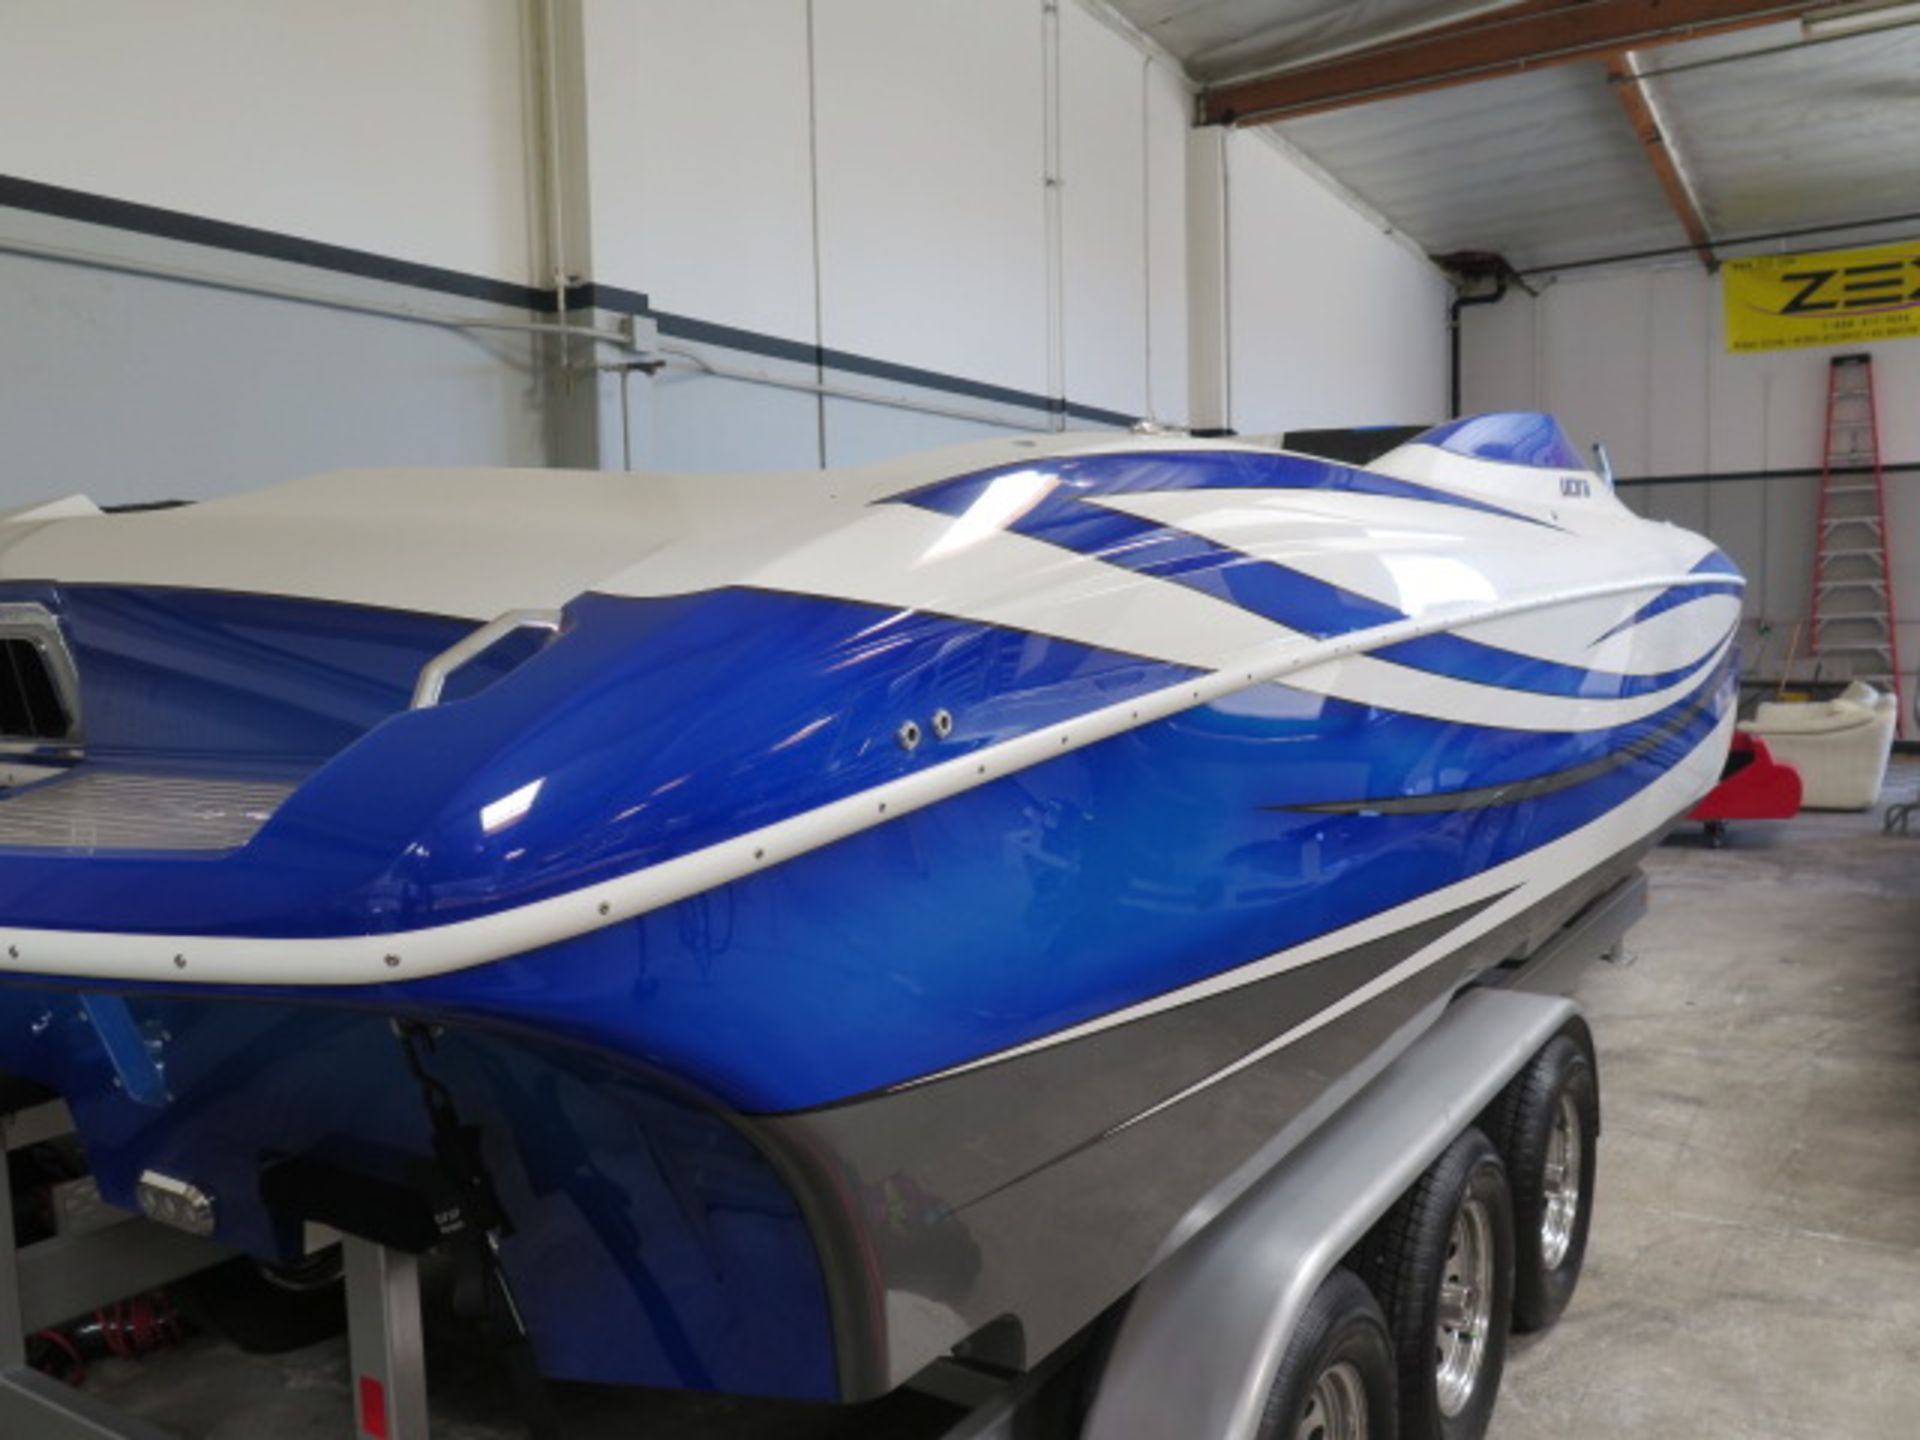 2022 27' Ultra Shadow Balsa Core CAT Hull Built for High Speed,w/Finished Bilge Gel Coat, SOLD AS IS - Image 6 of 21